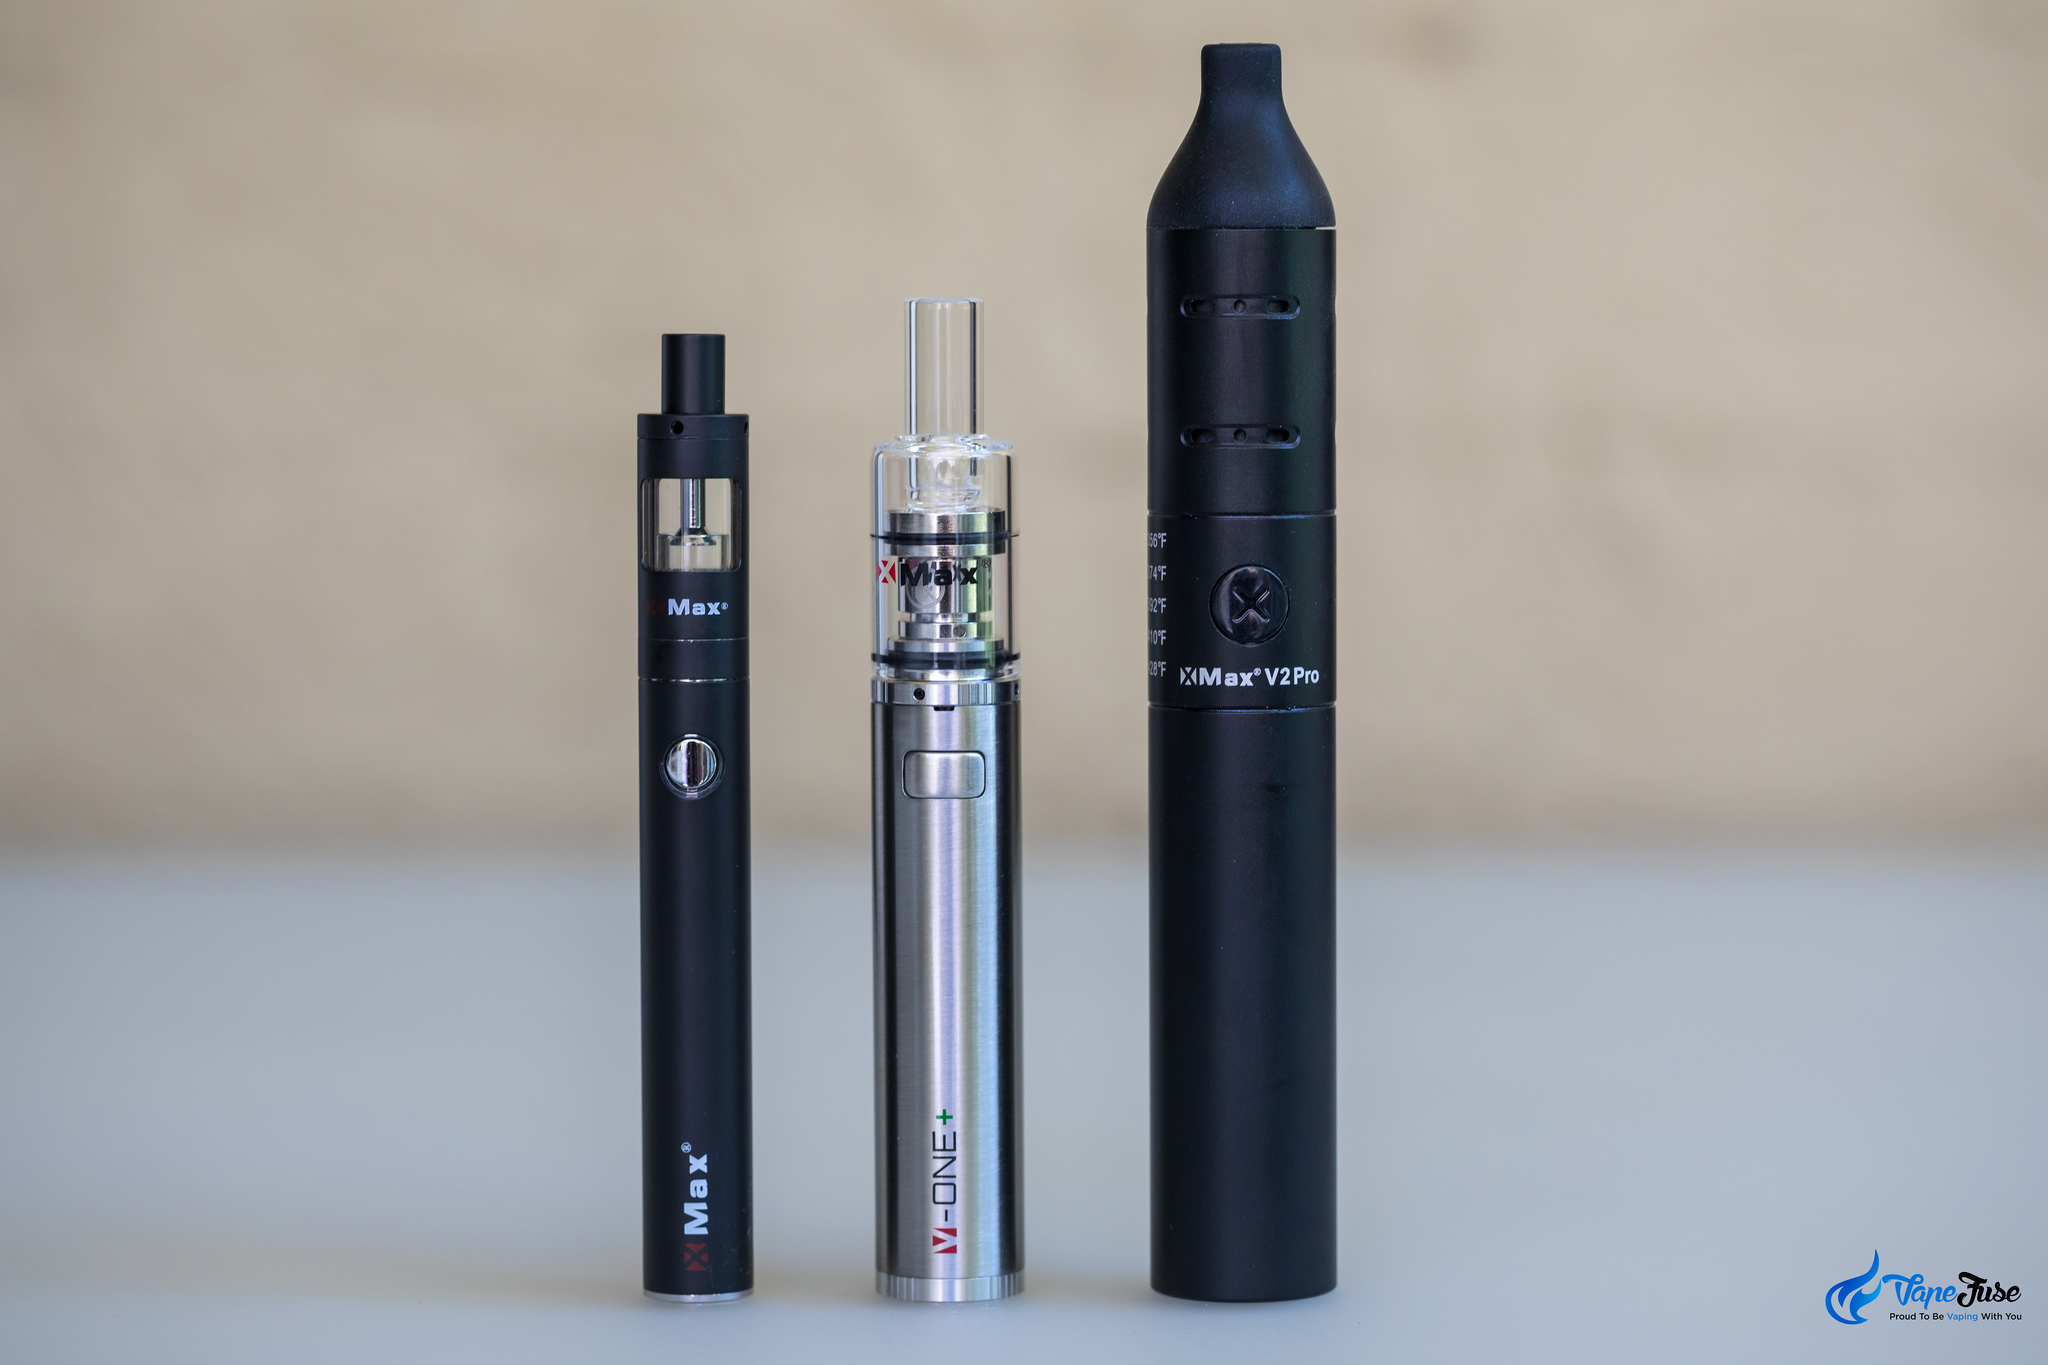 XMax vaporizers from Topgreen Technology